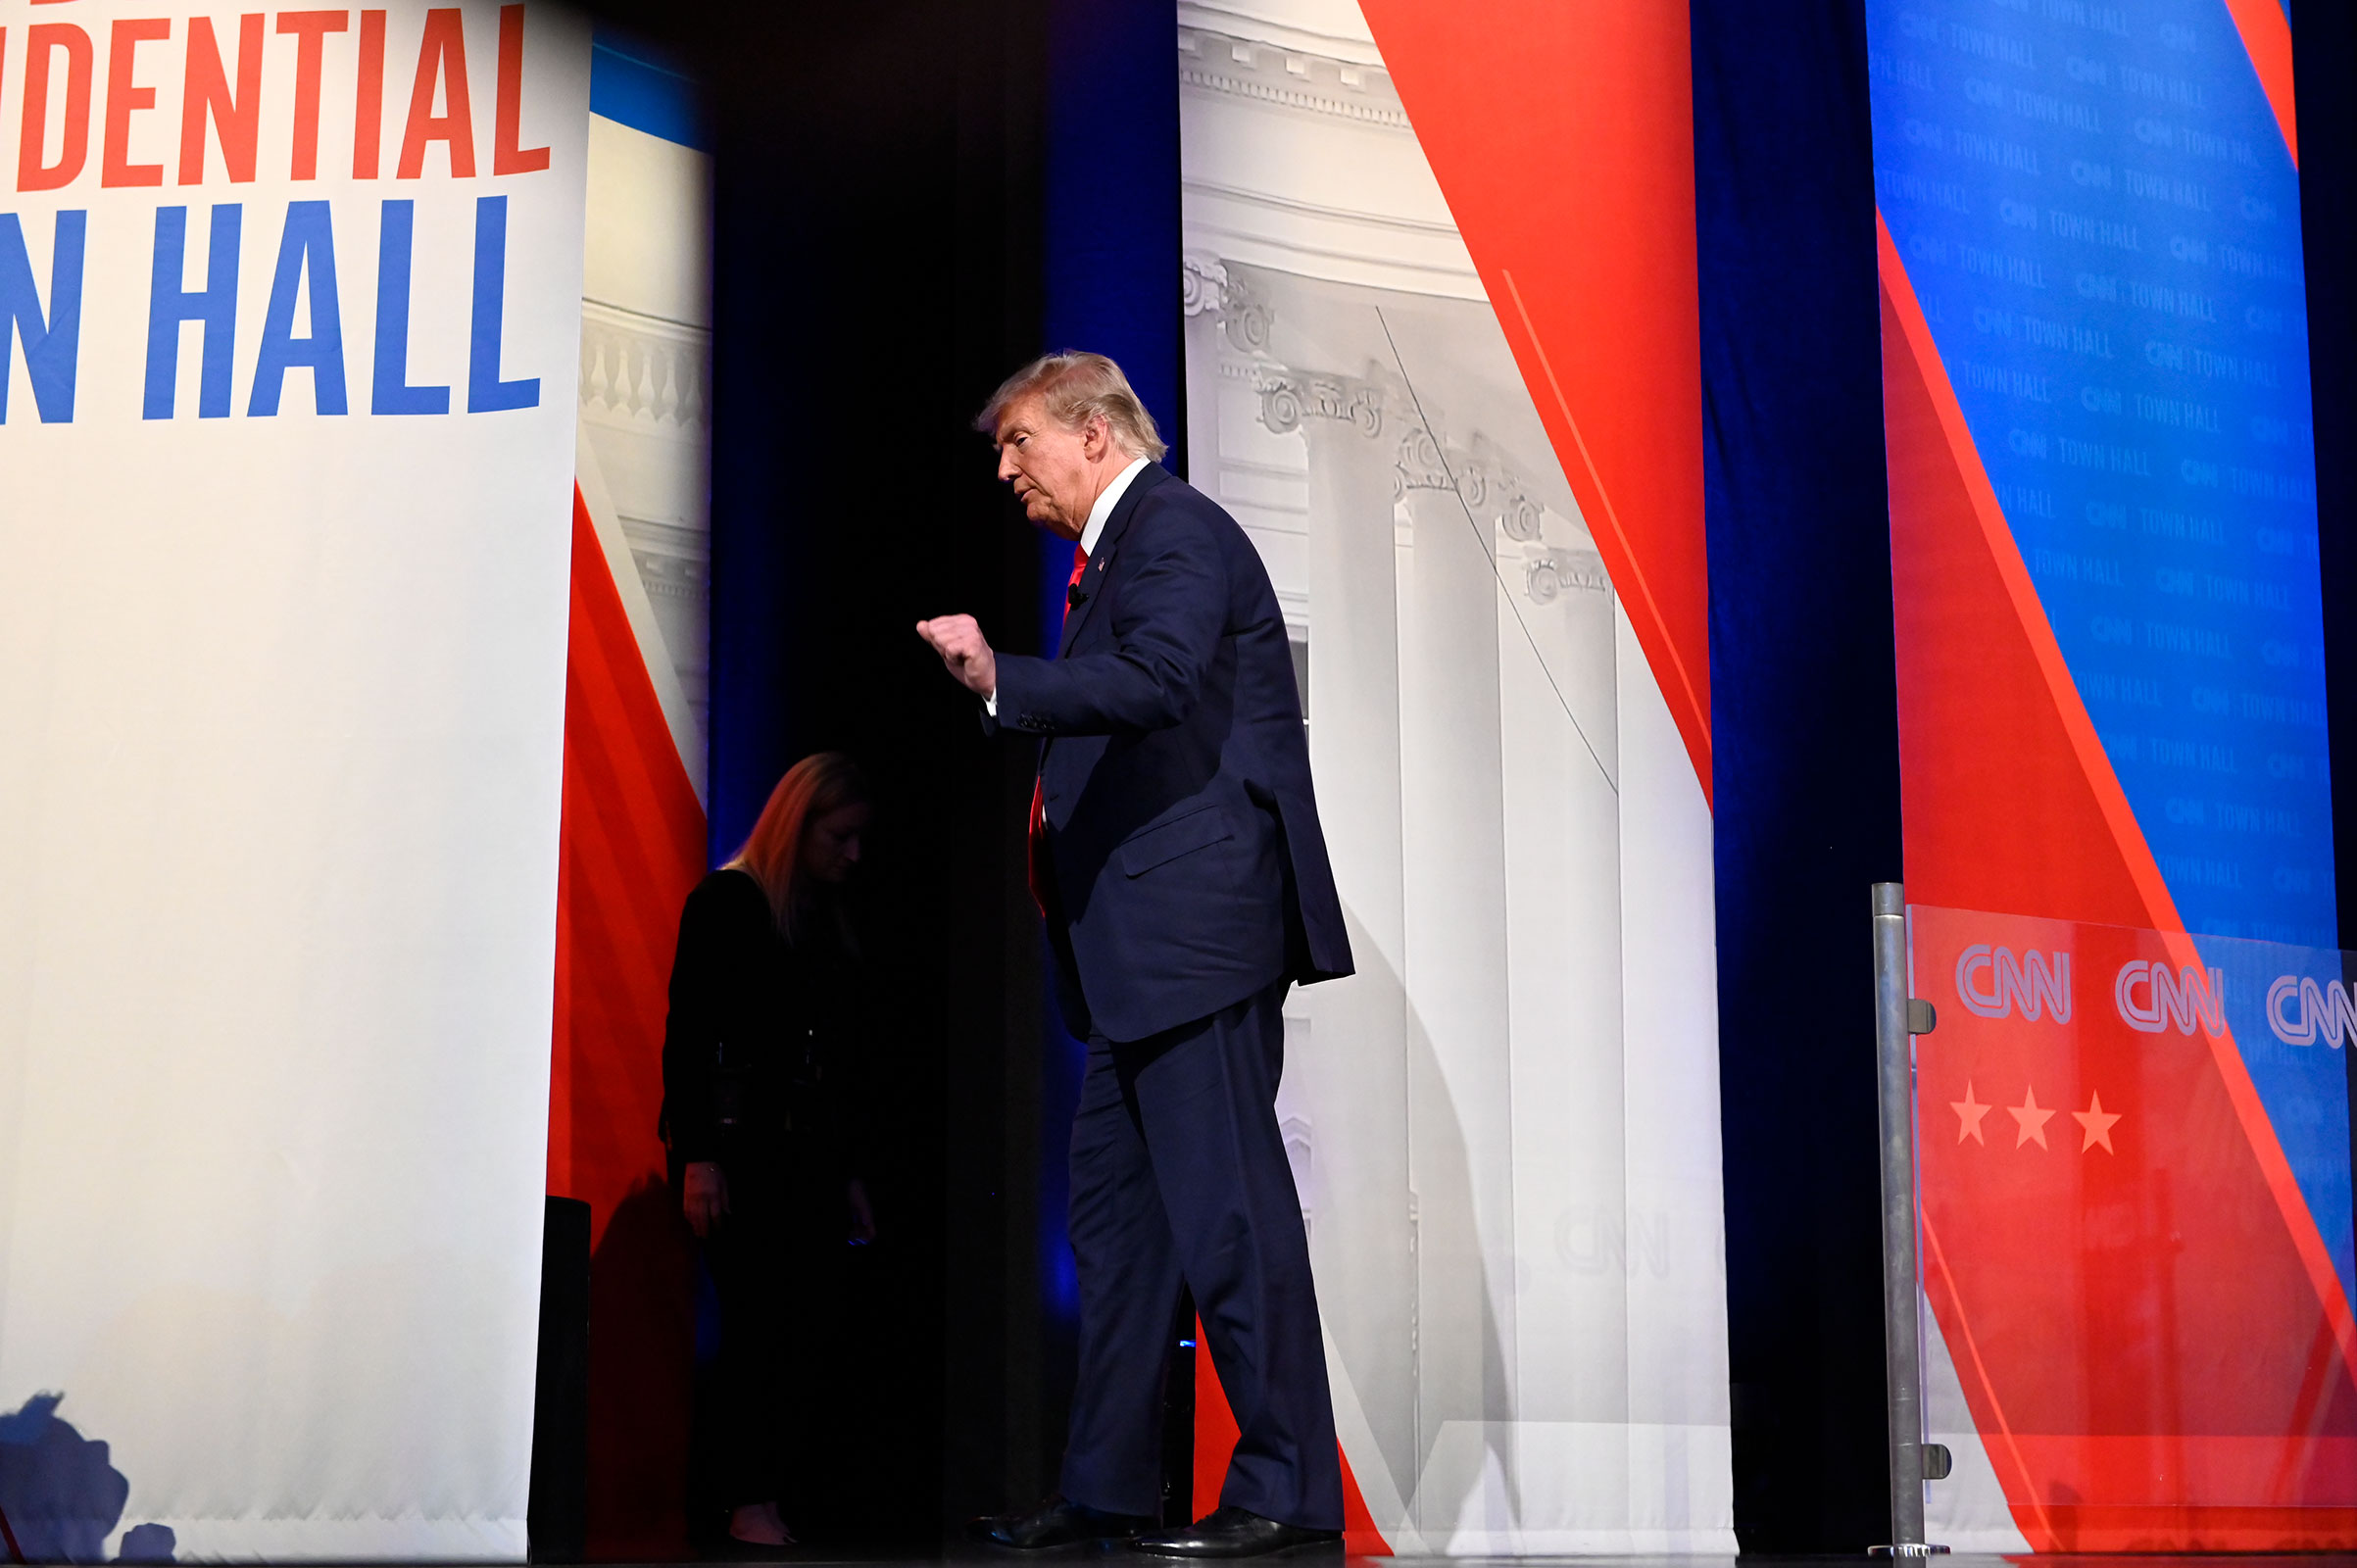 Former President Donald Trump walks offstage during a CNN Republican Town Hall moderated by CNN’s Kaitlan Collins at St. Anselm College in Manchester, New Hampshire, on Wednesday, May 10, 2023.